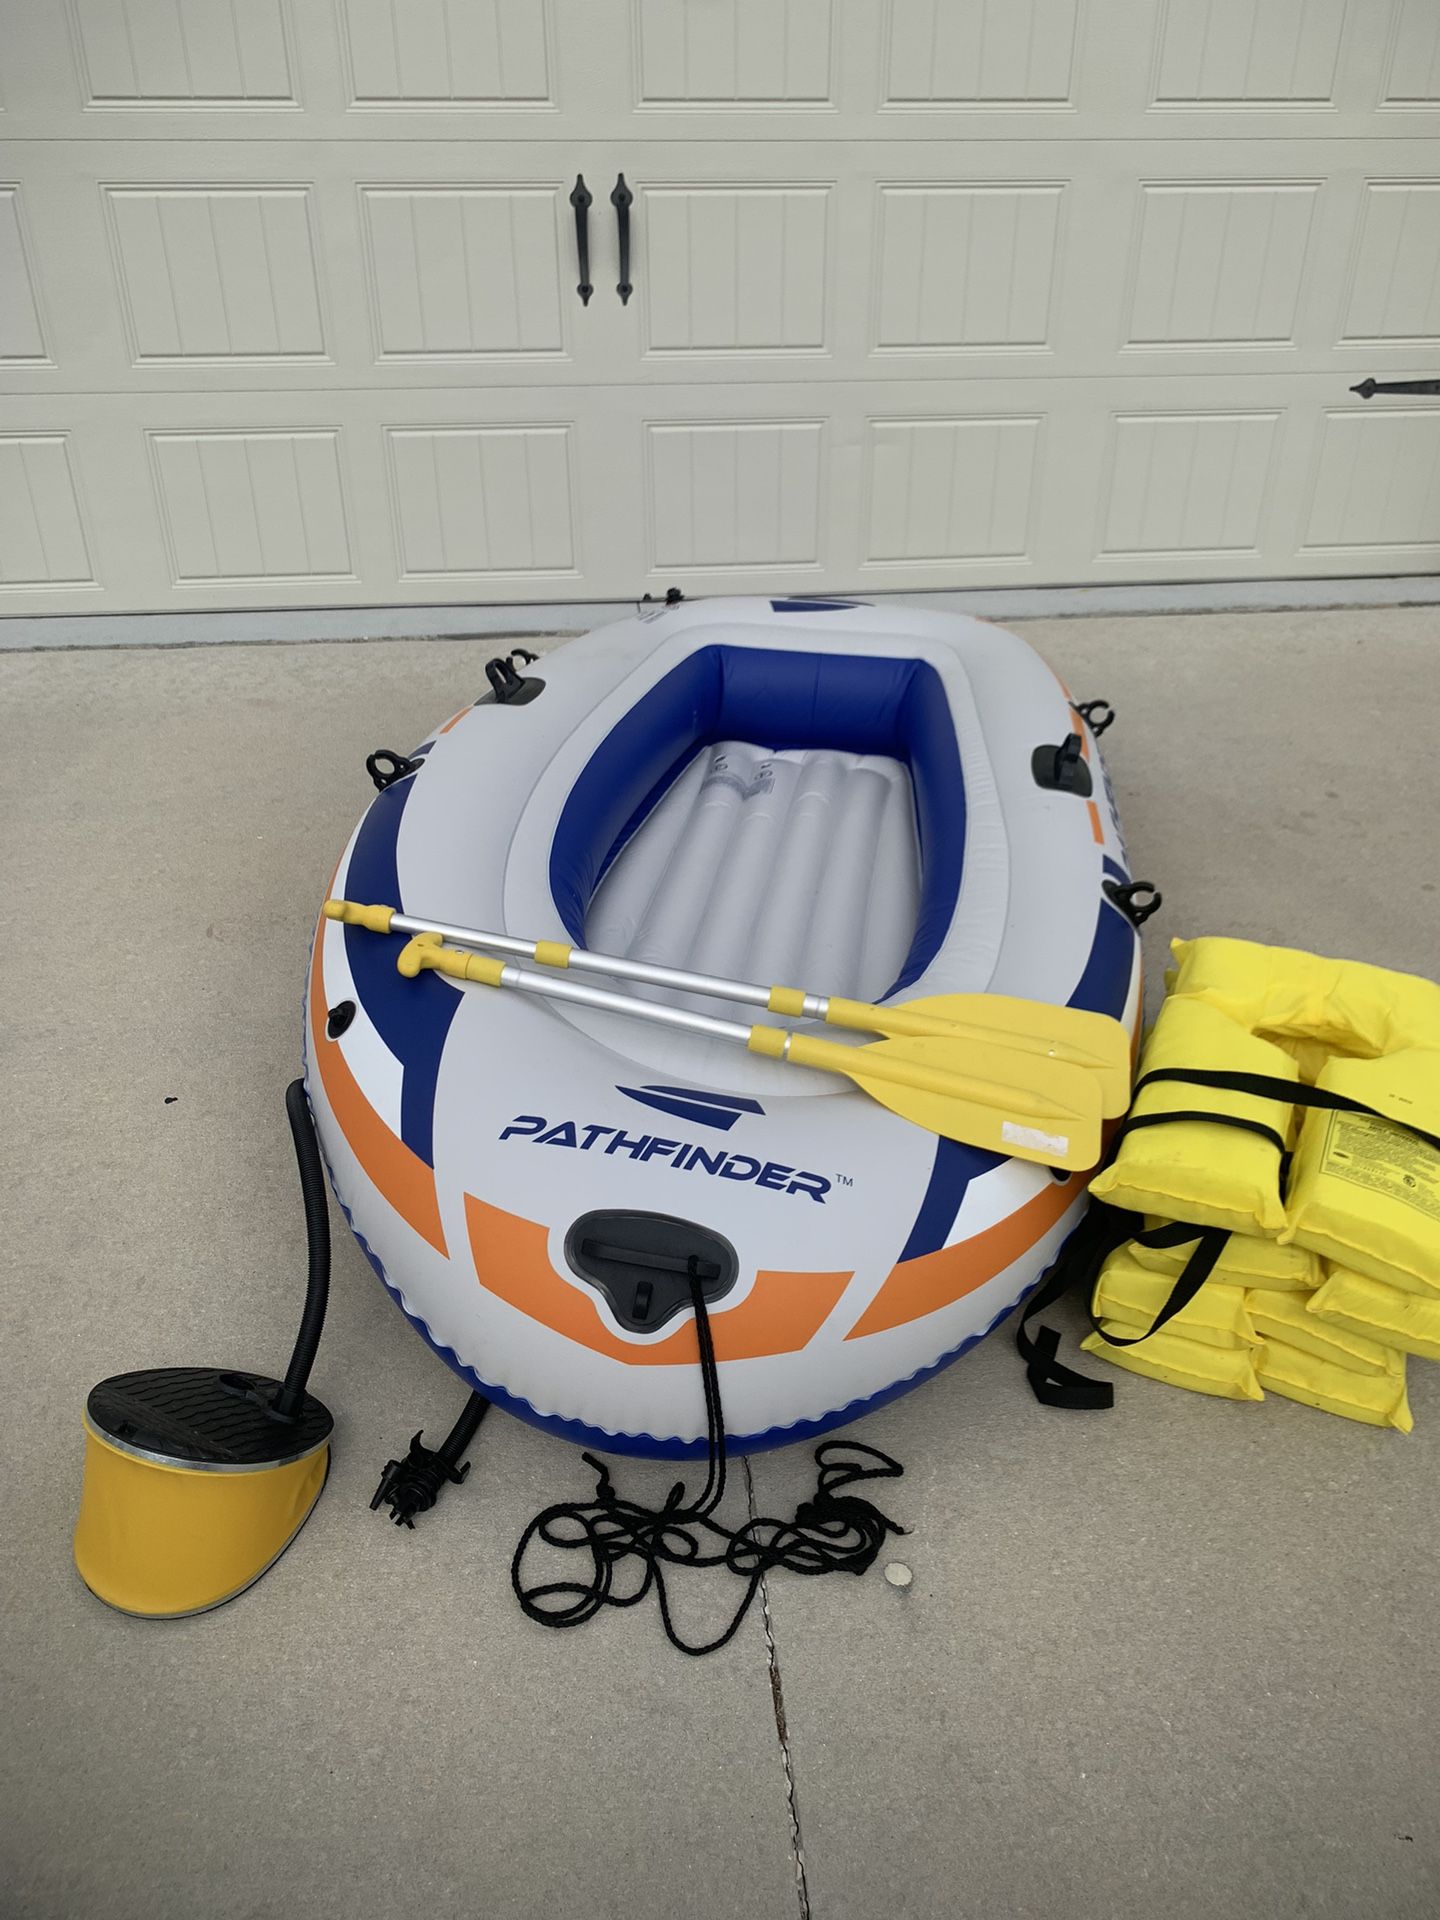 Like New Inflatable Boat 